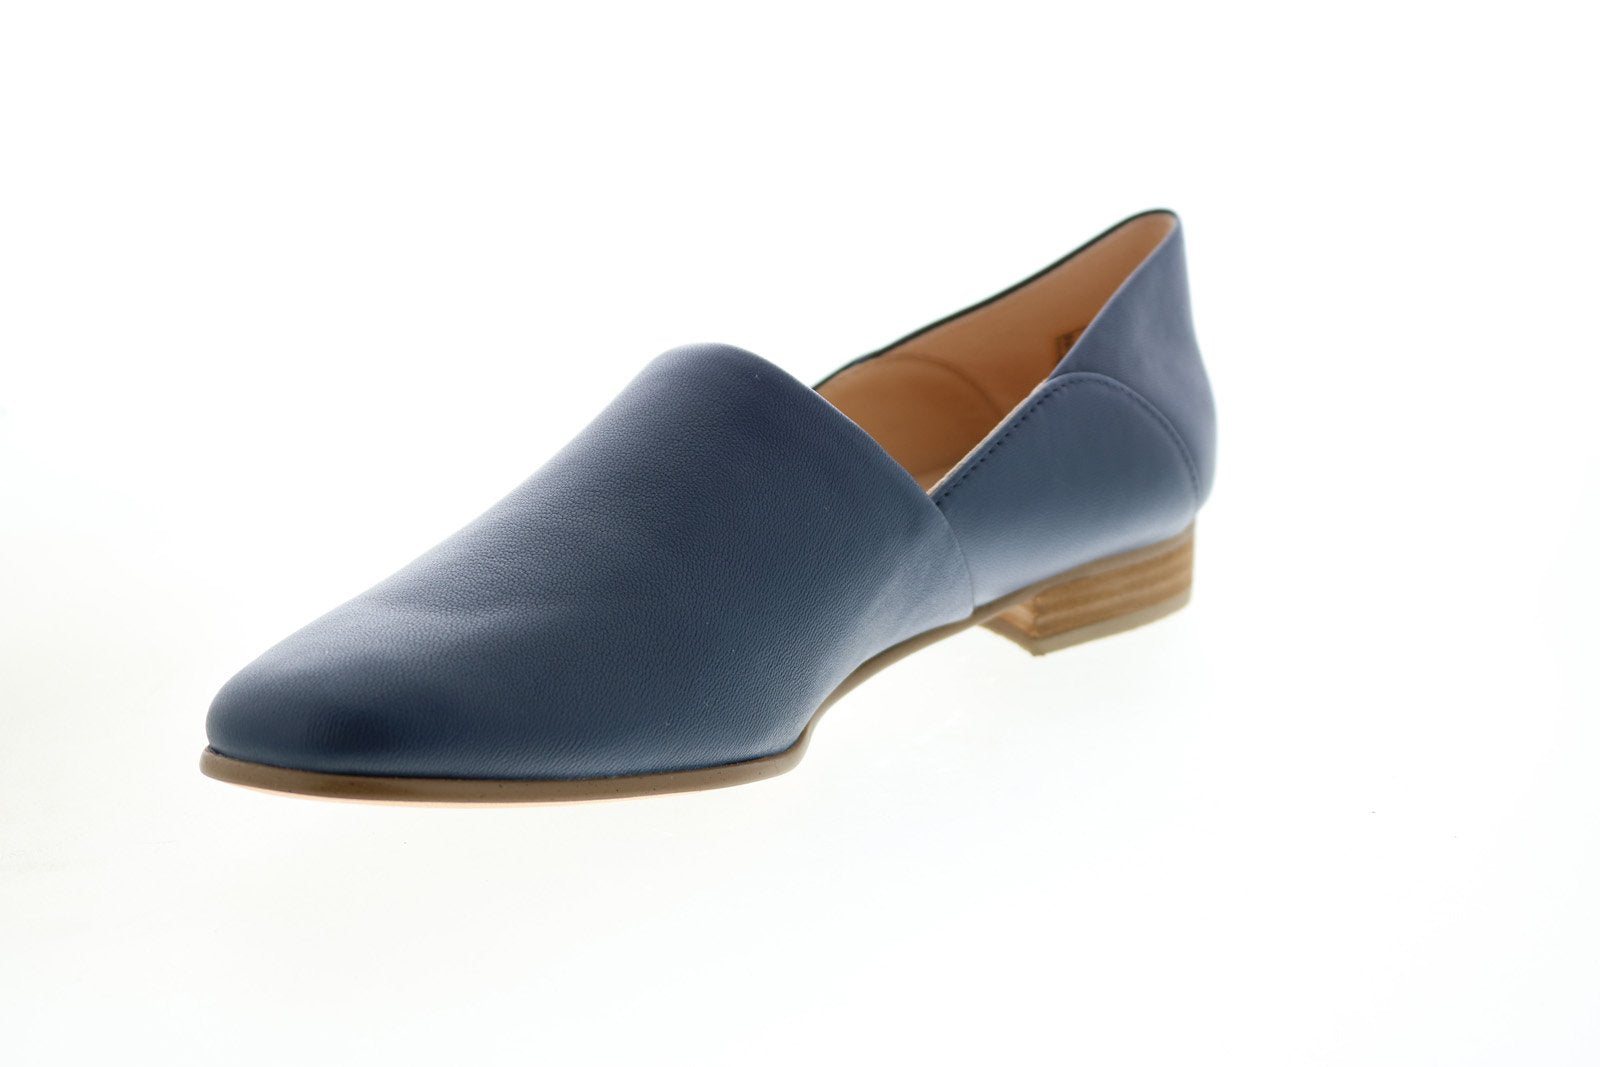 Clarks Pure Womens Blue Leather Slip Loafer Flats Sho - Ruze Shoes